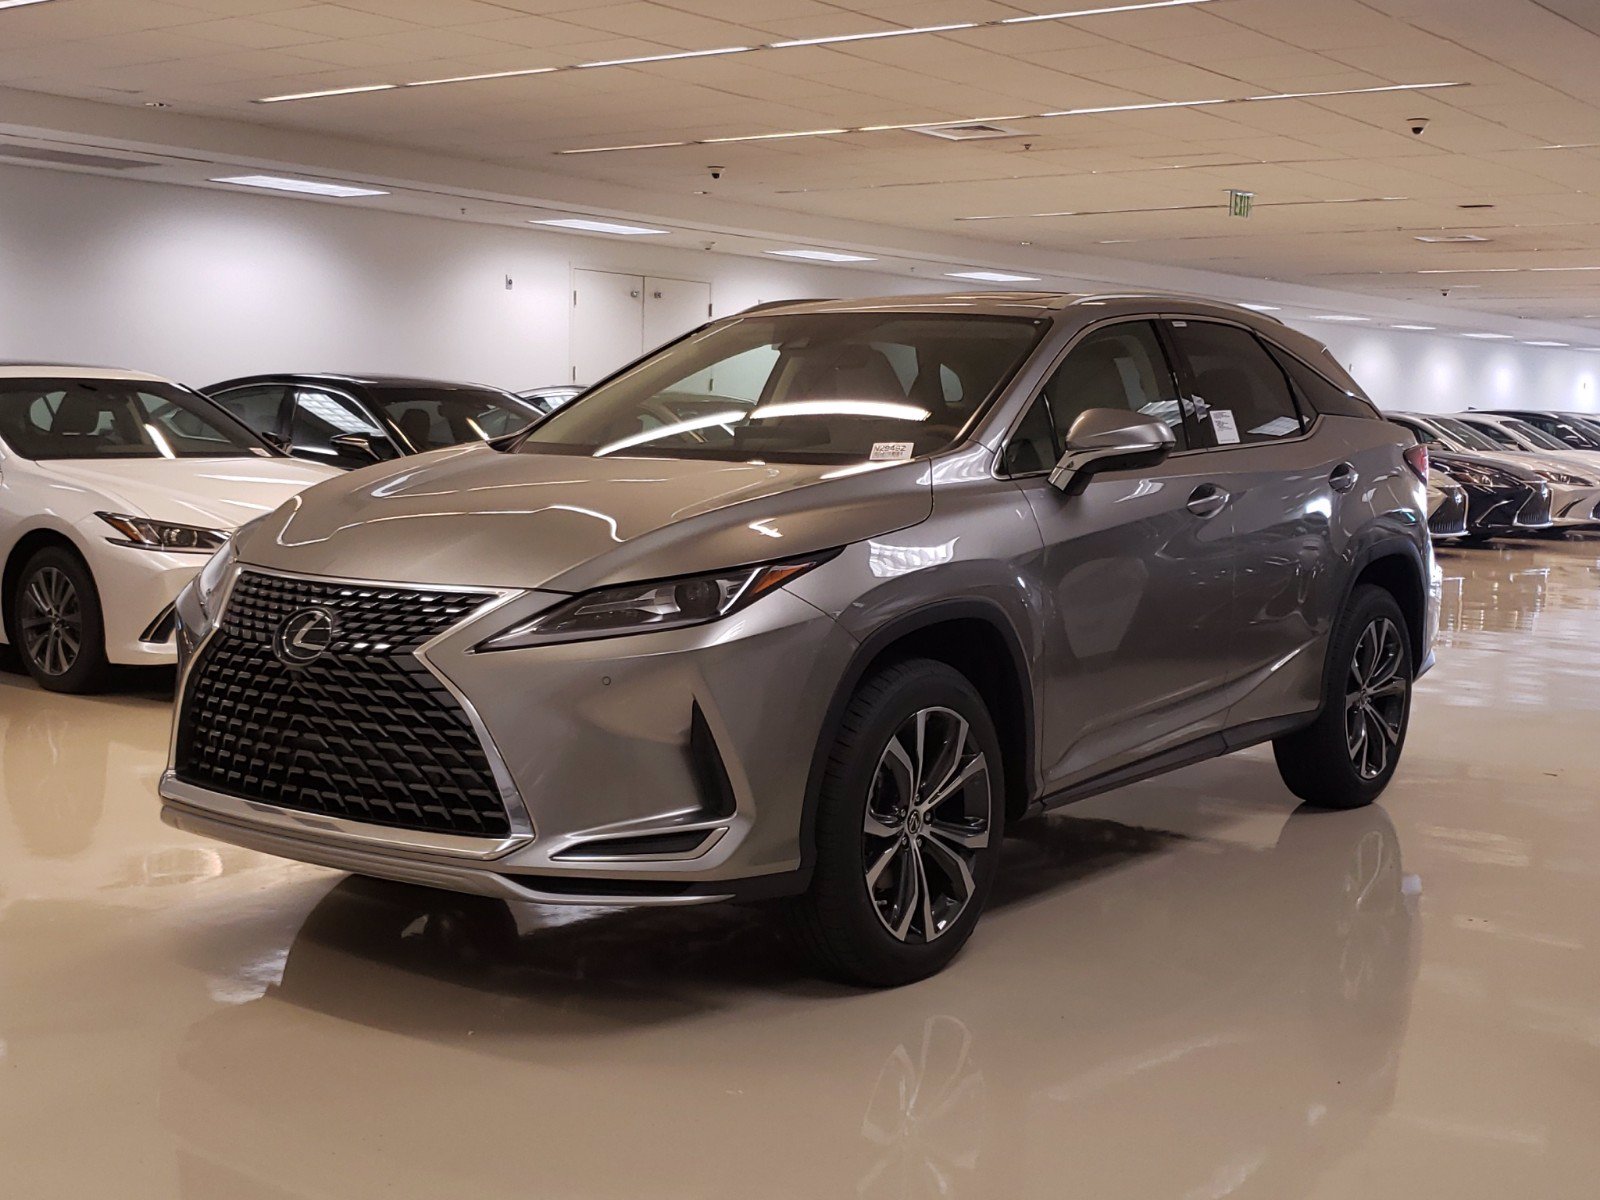 2022 Lexus Rx 350 Audio System Engine Colors Images And Photos Finder